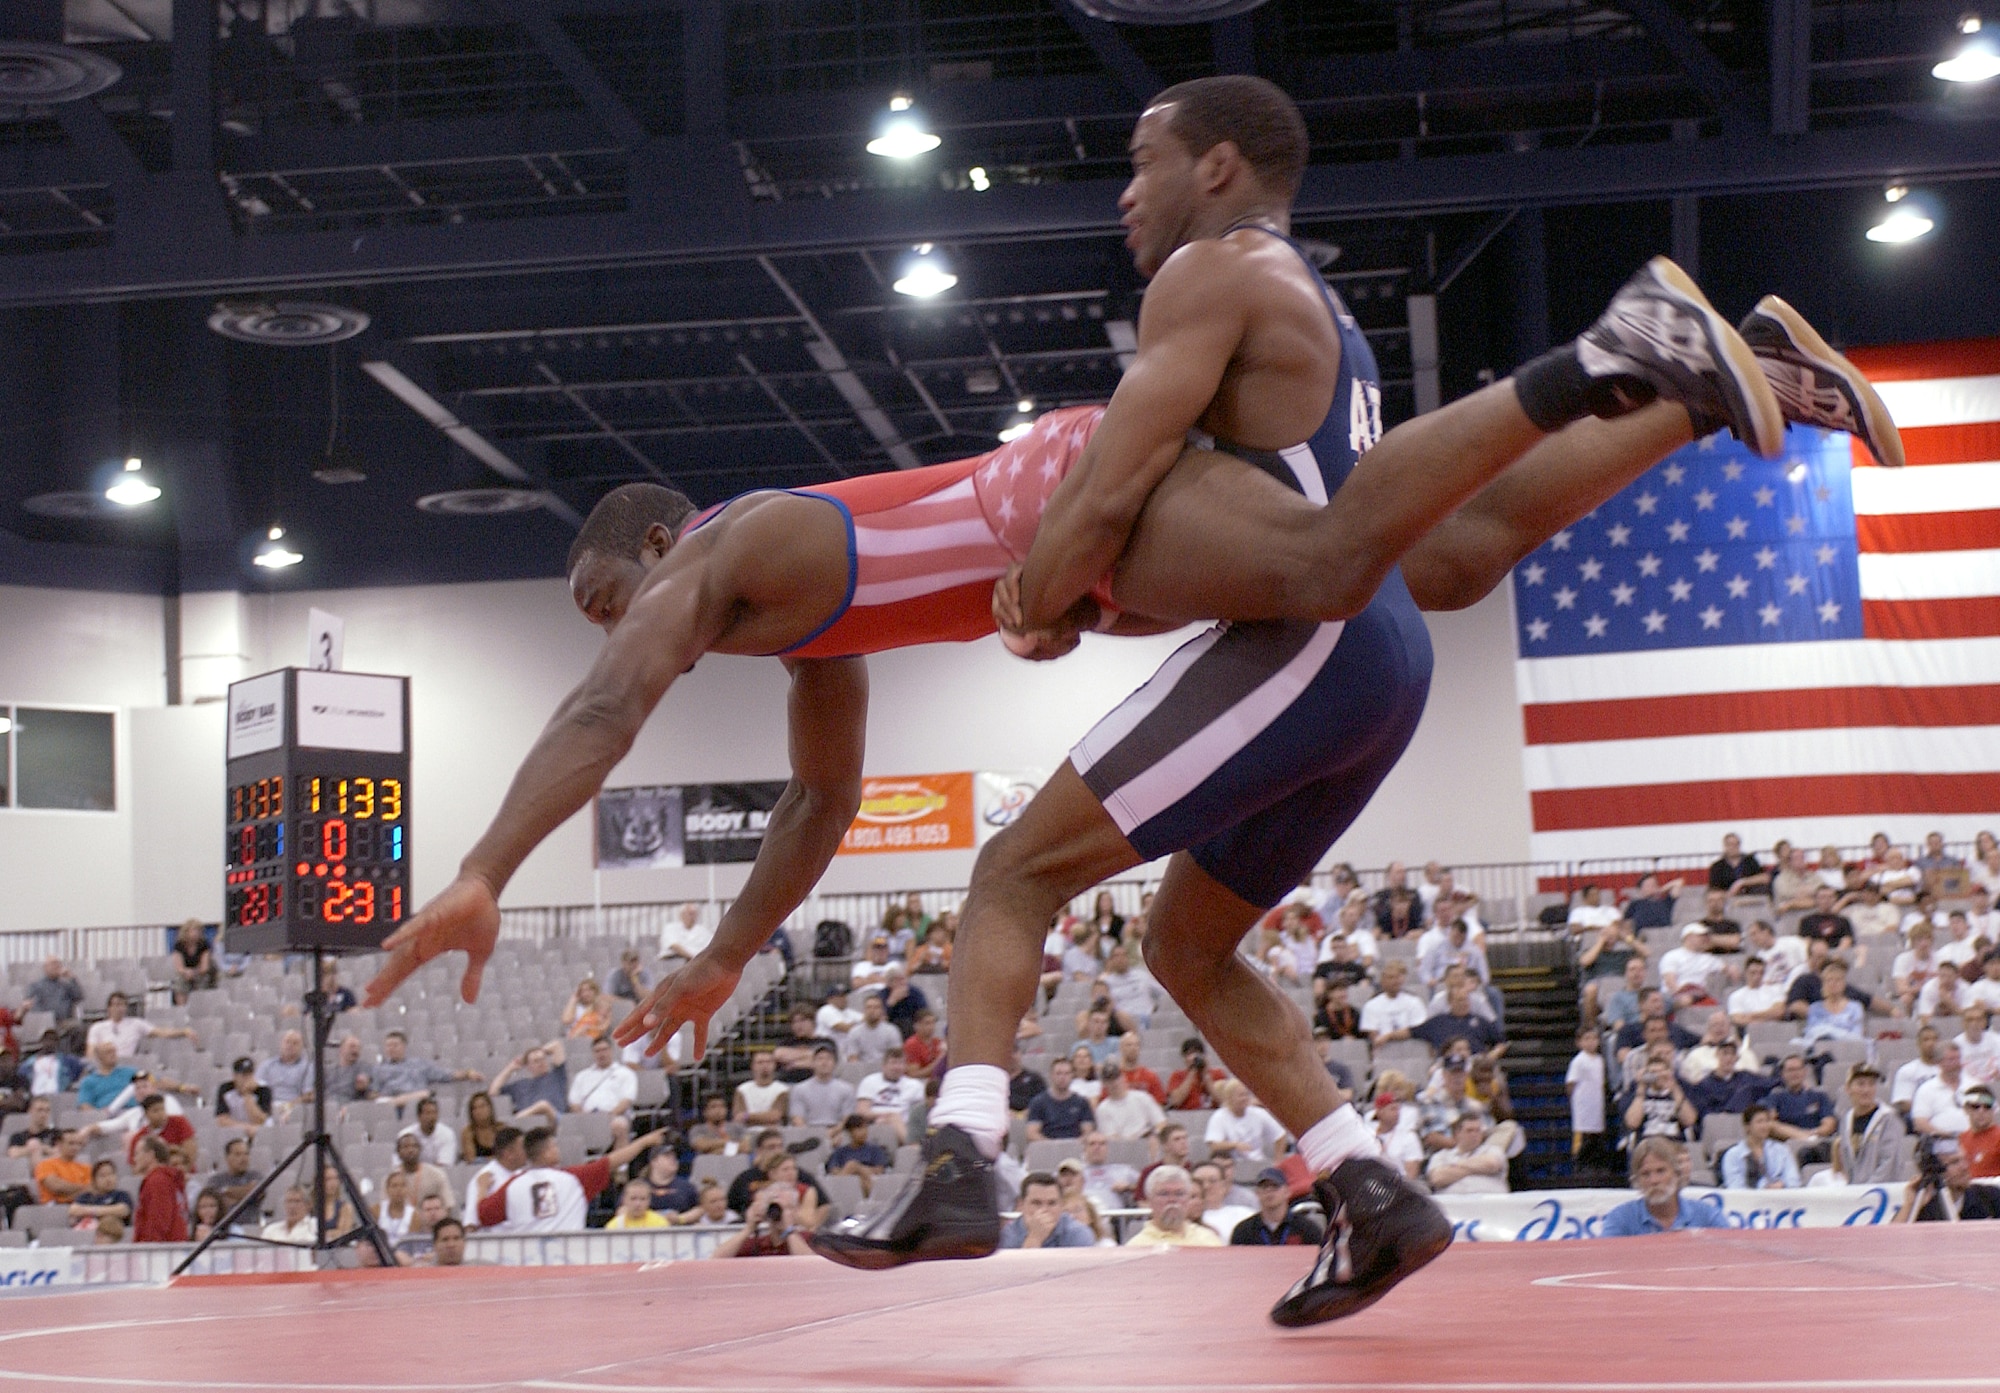 LAS VEGAS -- Steve Woods, 2004 armed forces champion in the 163-pound Greco-Roman wrestling division, spins an opponent during the U.S. National Wrestling Championships here April 9.  Woods took the silver in his division and will represent the Air Force at the U.S. Olympic trials May 21 to 23 in Indianapolis. (U.S. Air Force photo by Airman 1st Class Daniel DeCook)             